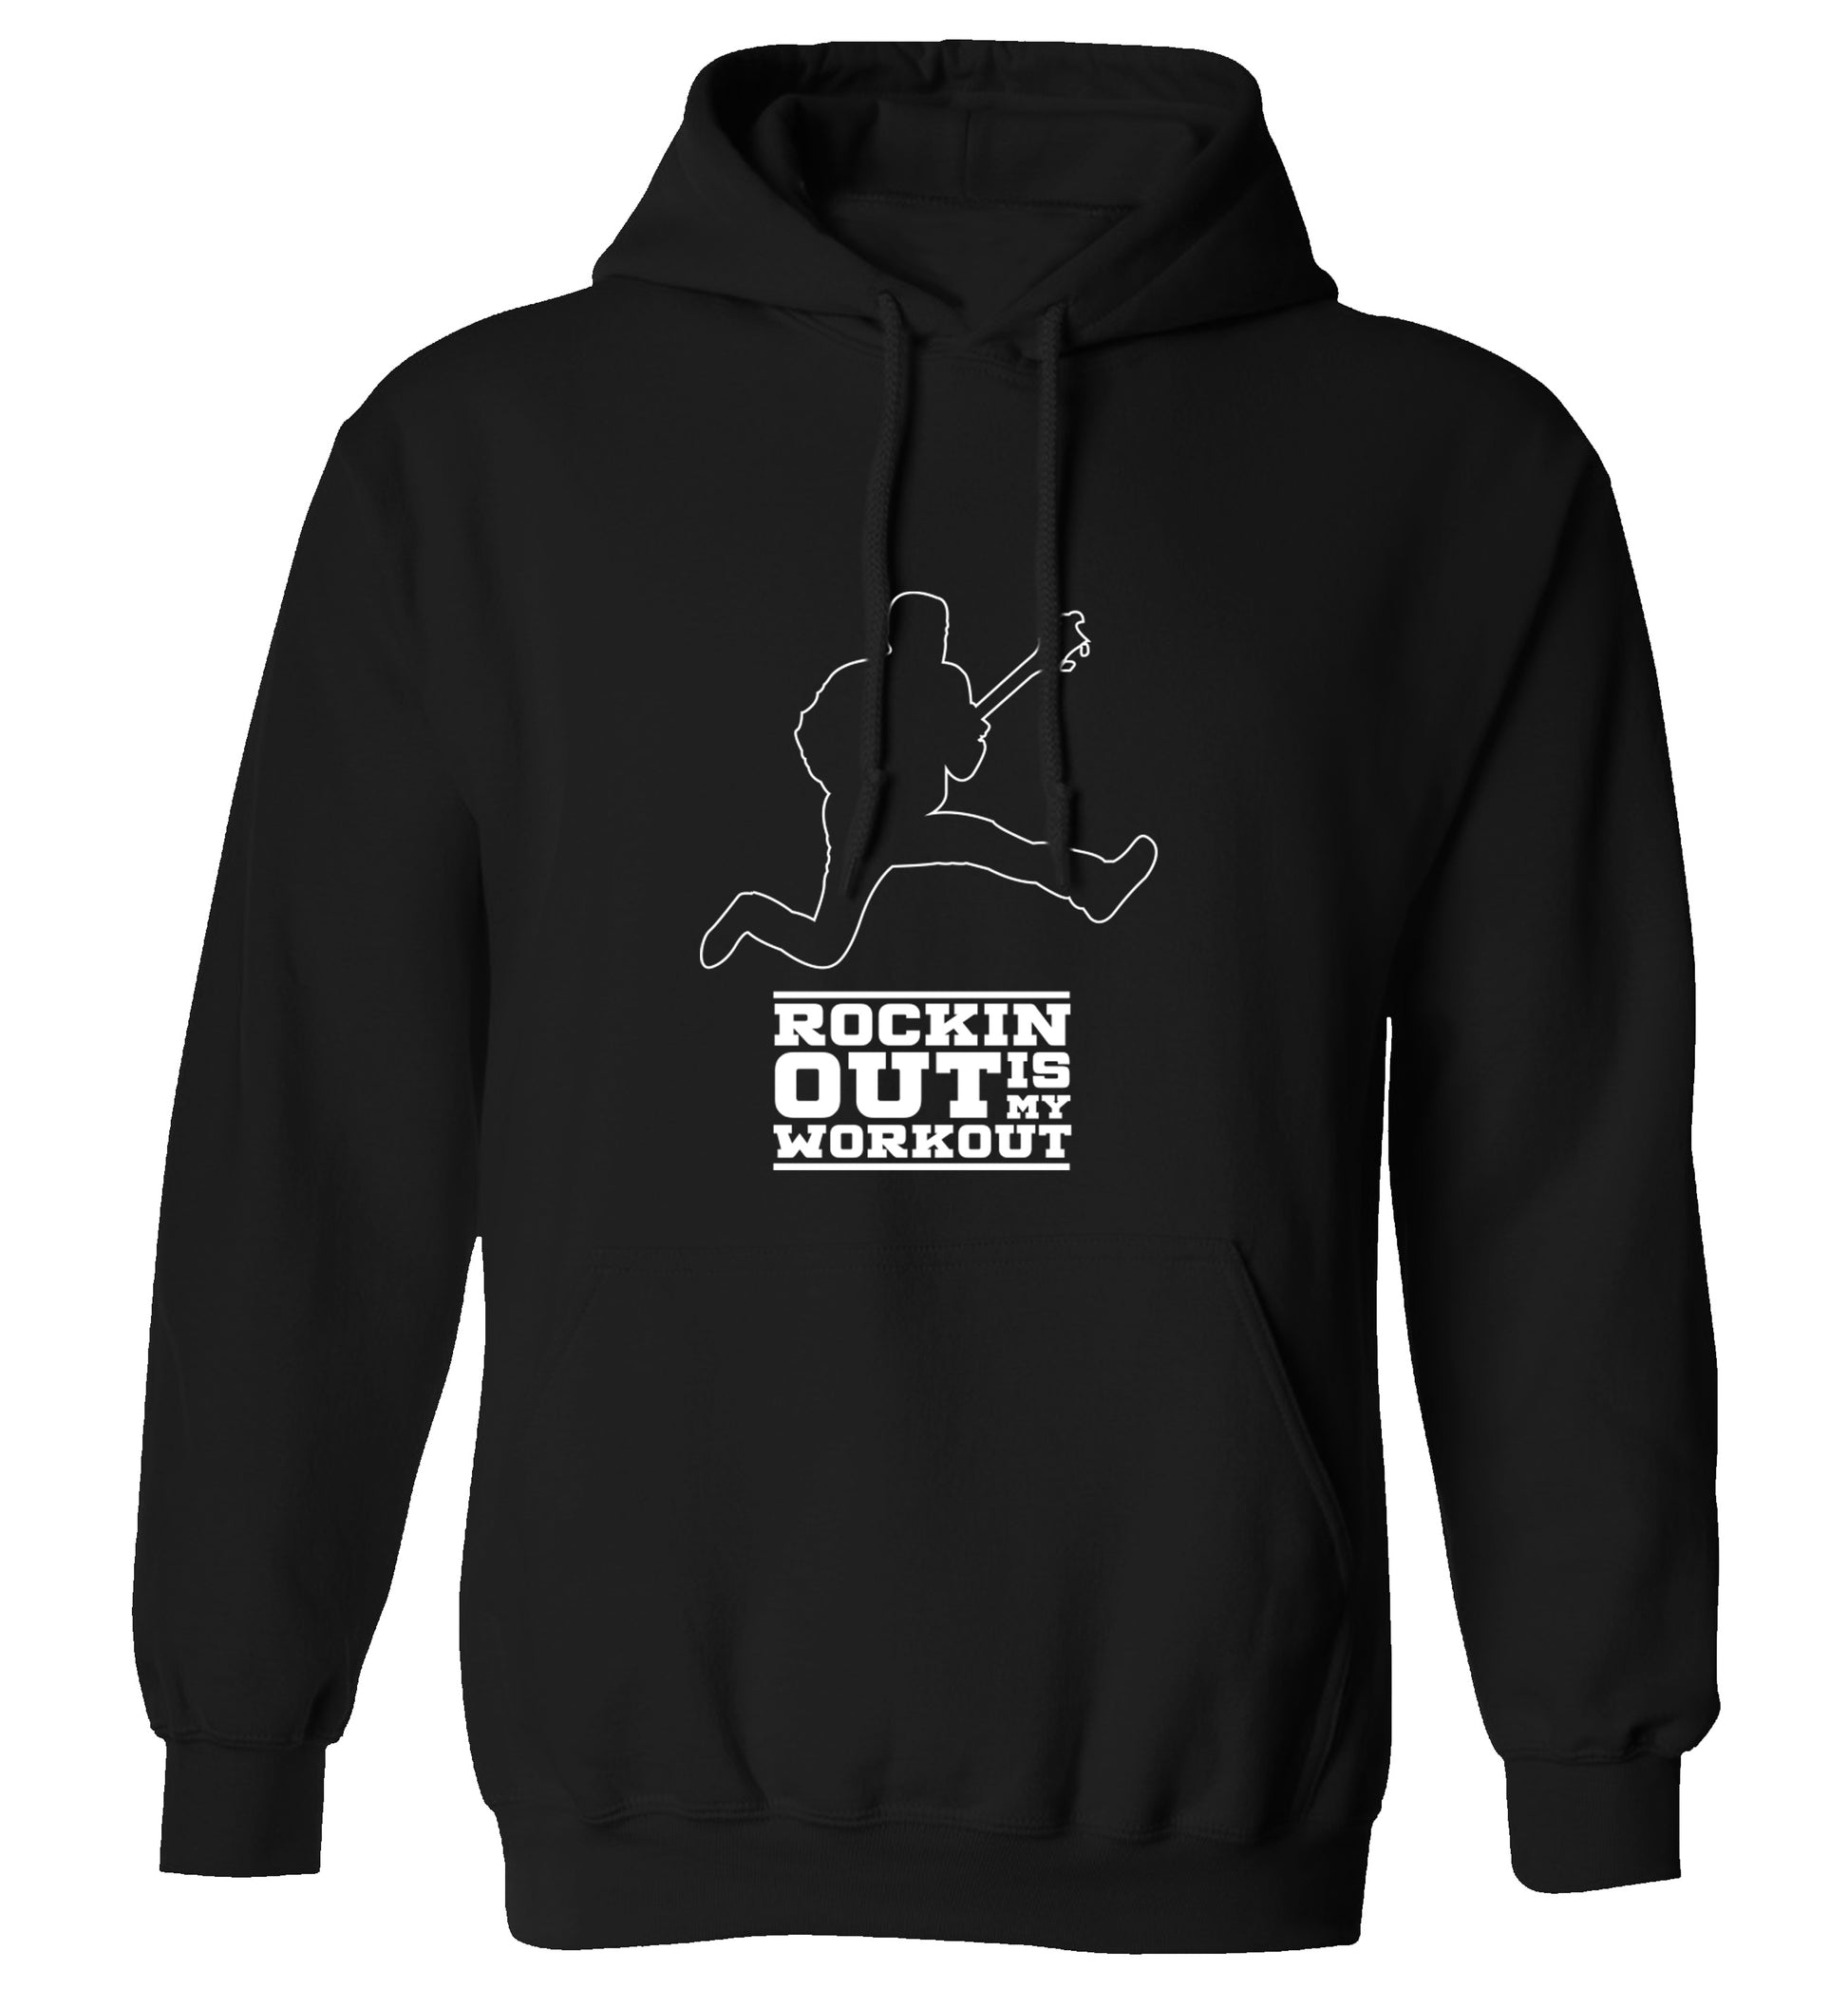 Rockin out is my workout 2 adults unisex black hoodie 2XL